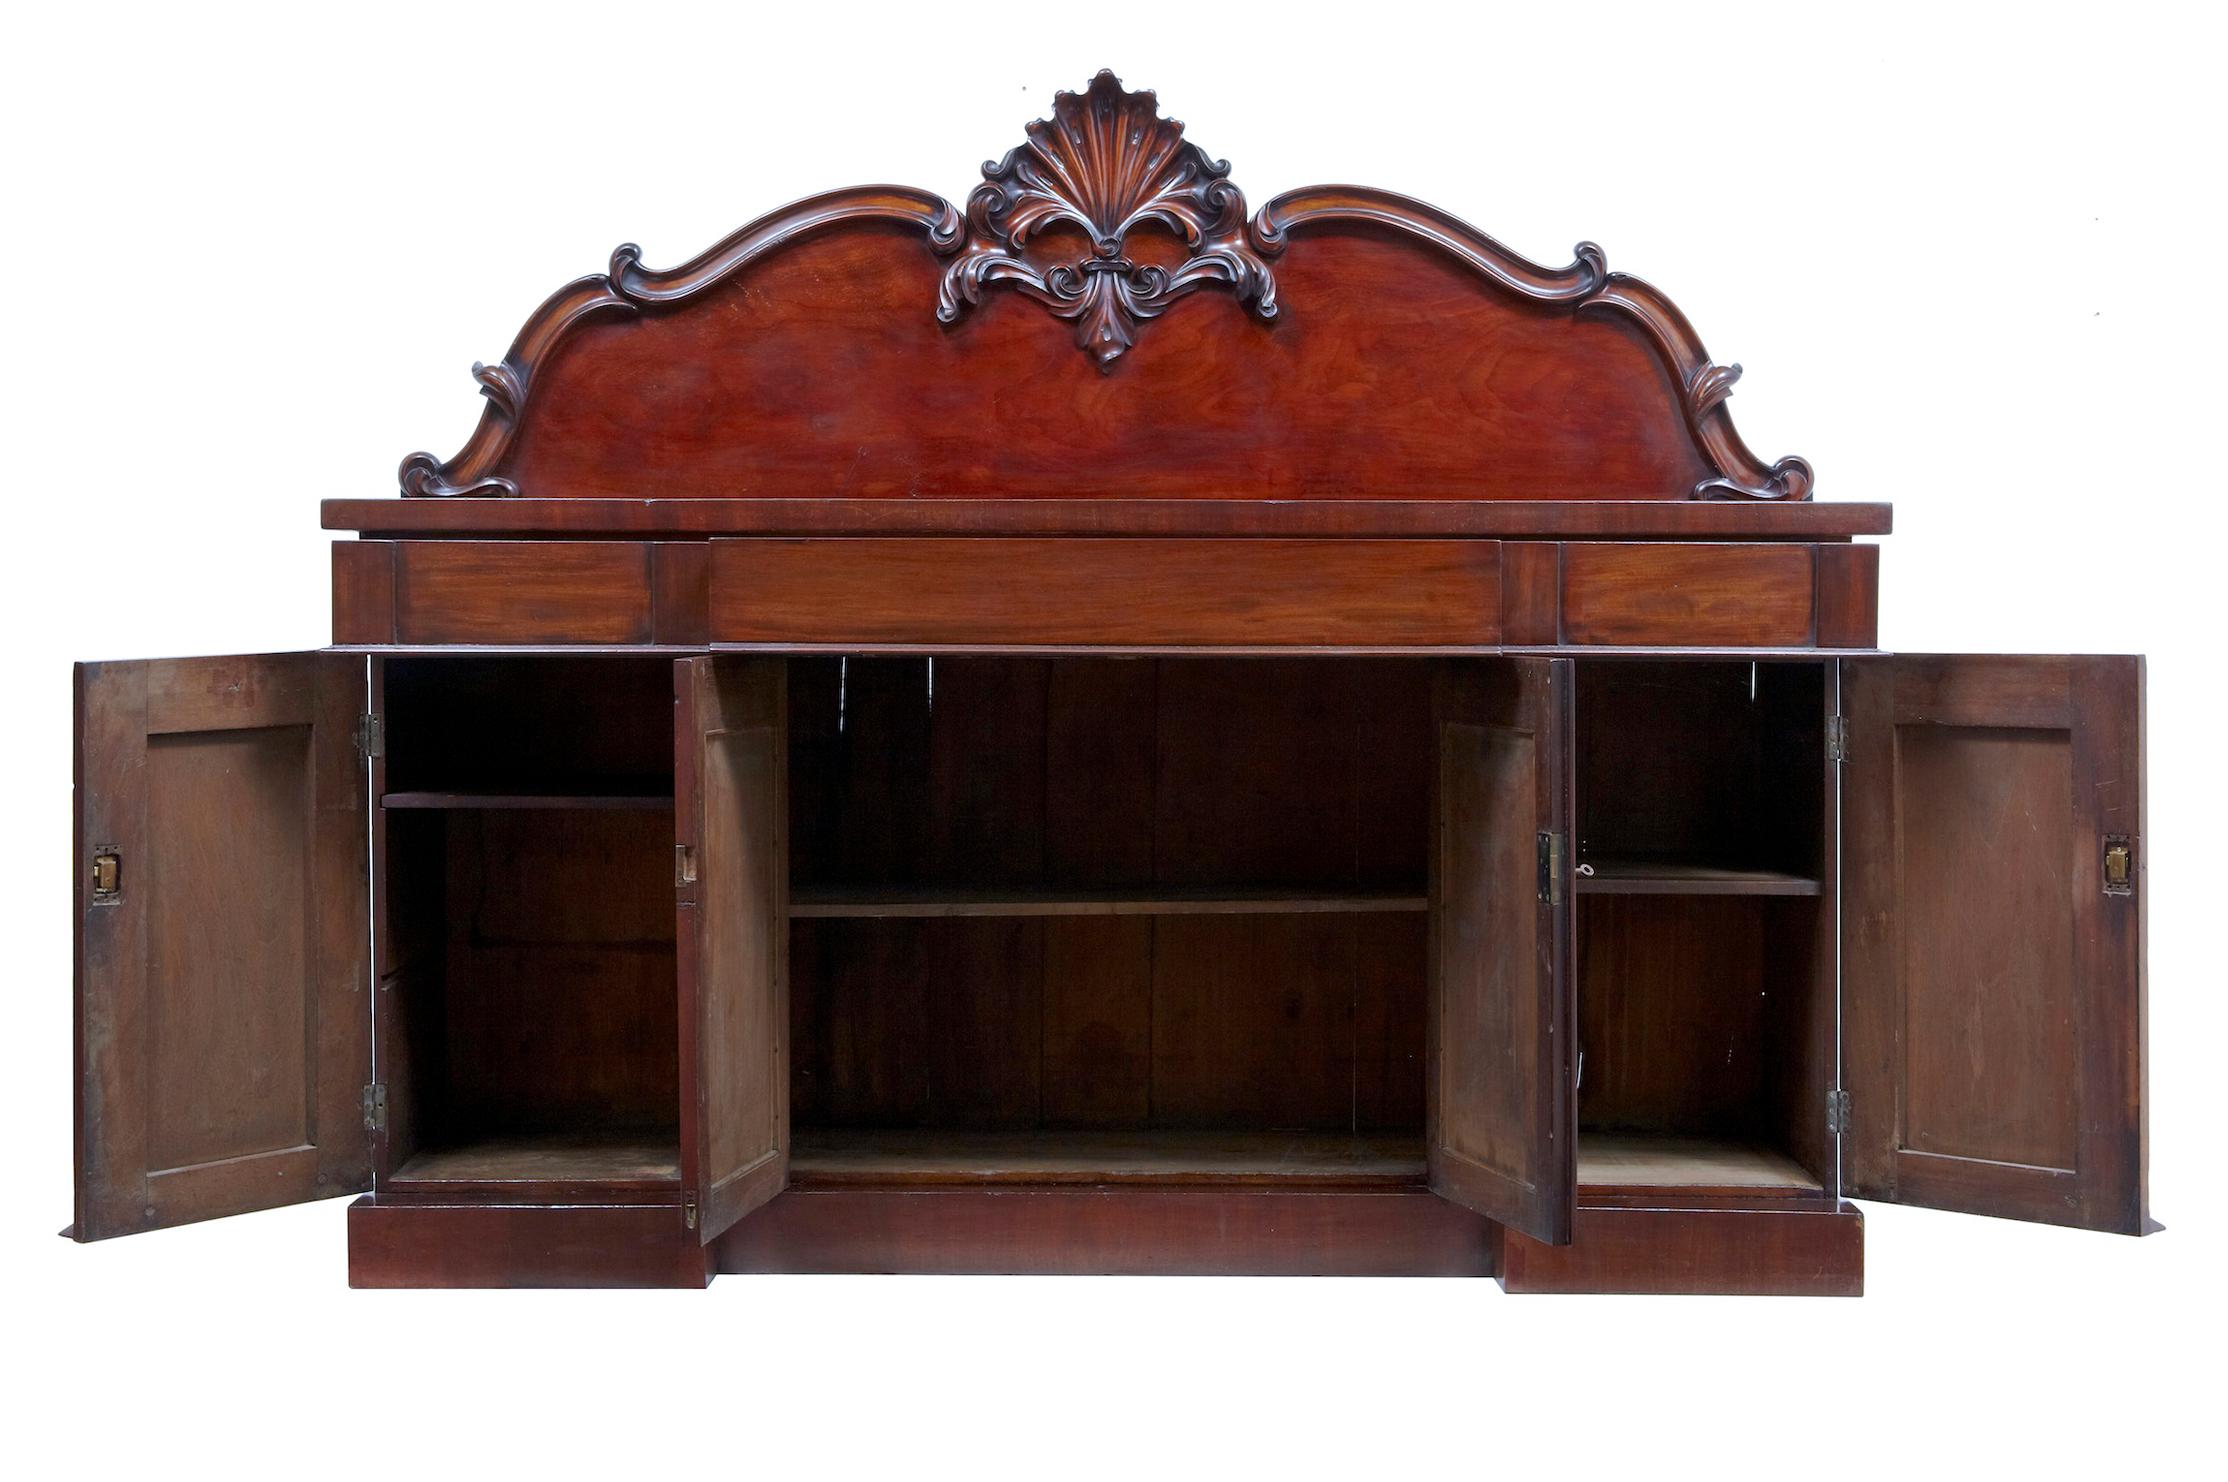 Good quality mahogany sideboard circa 1835. Lovely rich color. Main feature is the deeply carved stylized floral/shell central carving. 2 parts. 3 drawers above a double door cupboard containing a single drawer, flanked either side by a single door